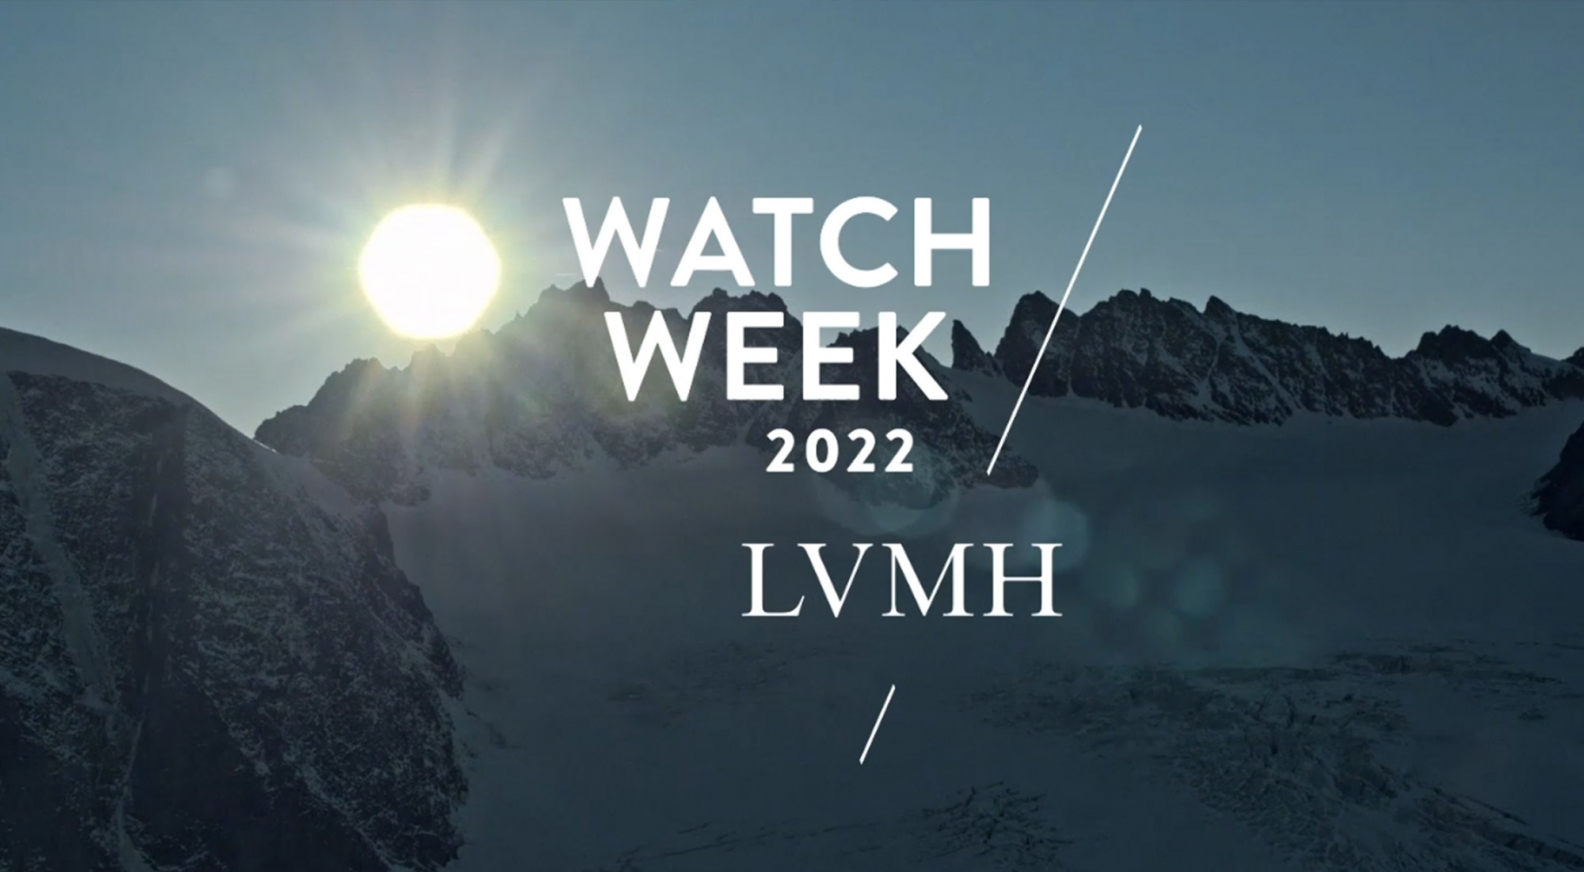 LVMH Watch Week 2022: The 6 watches we have our eyes on